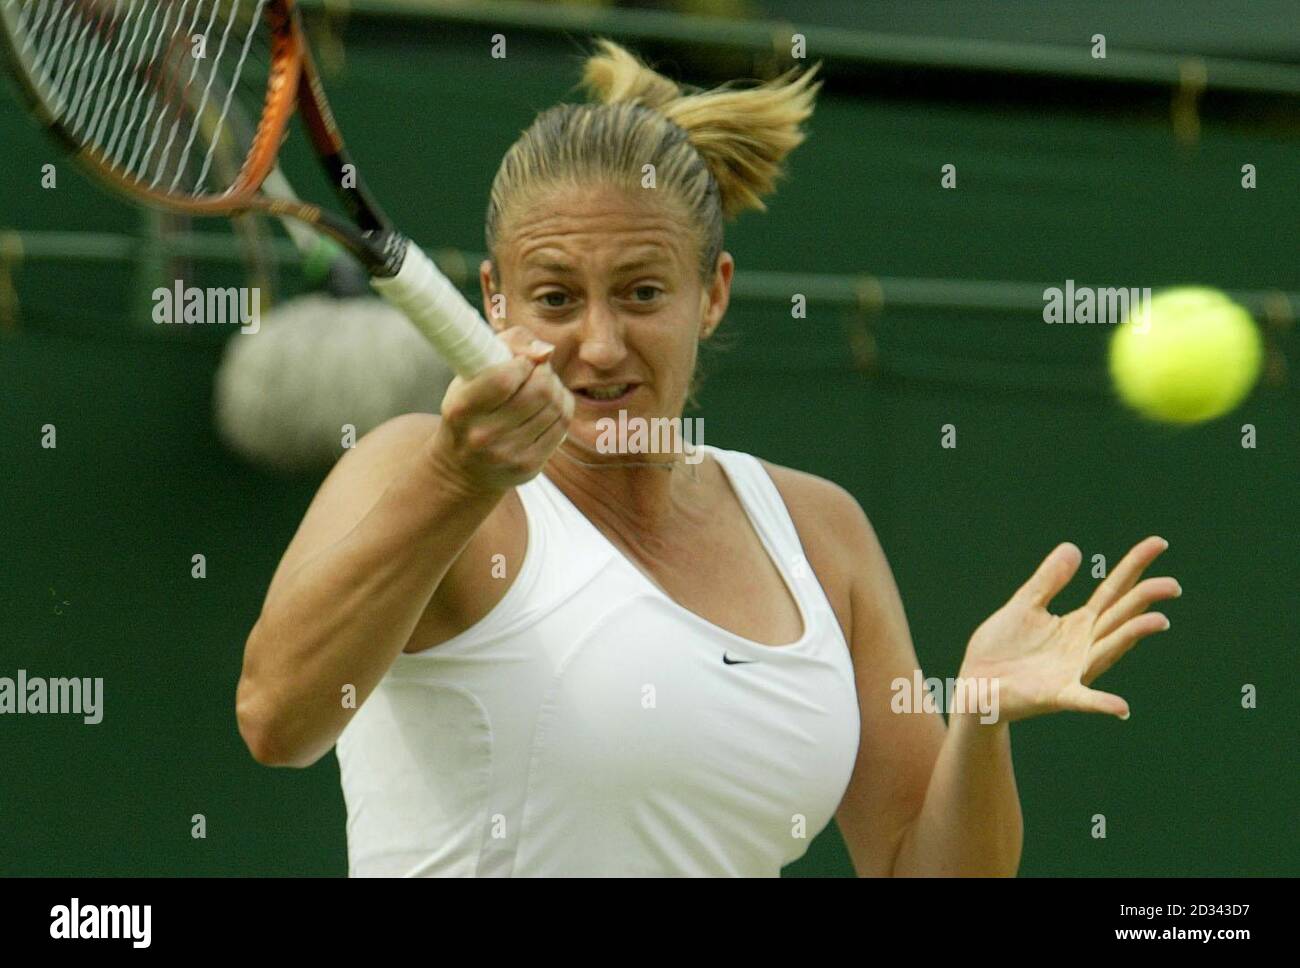 EDITORIAL USE ONLY, NO MOBILE PHONE USE : Mary Pierce from France crashes out of Wimbledon, losing in straight sets to Justine Henin-Hardenne from Belgium 6:3/6:3 in the fourth round of the All England Lawn Tennis Championships at Wimbledon. Stock Photo